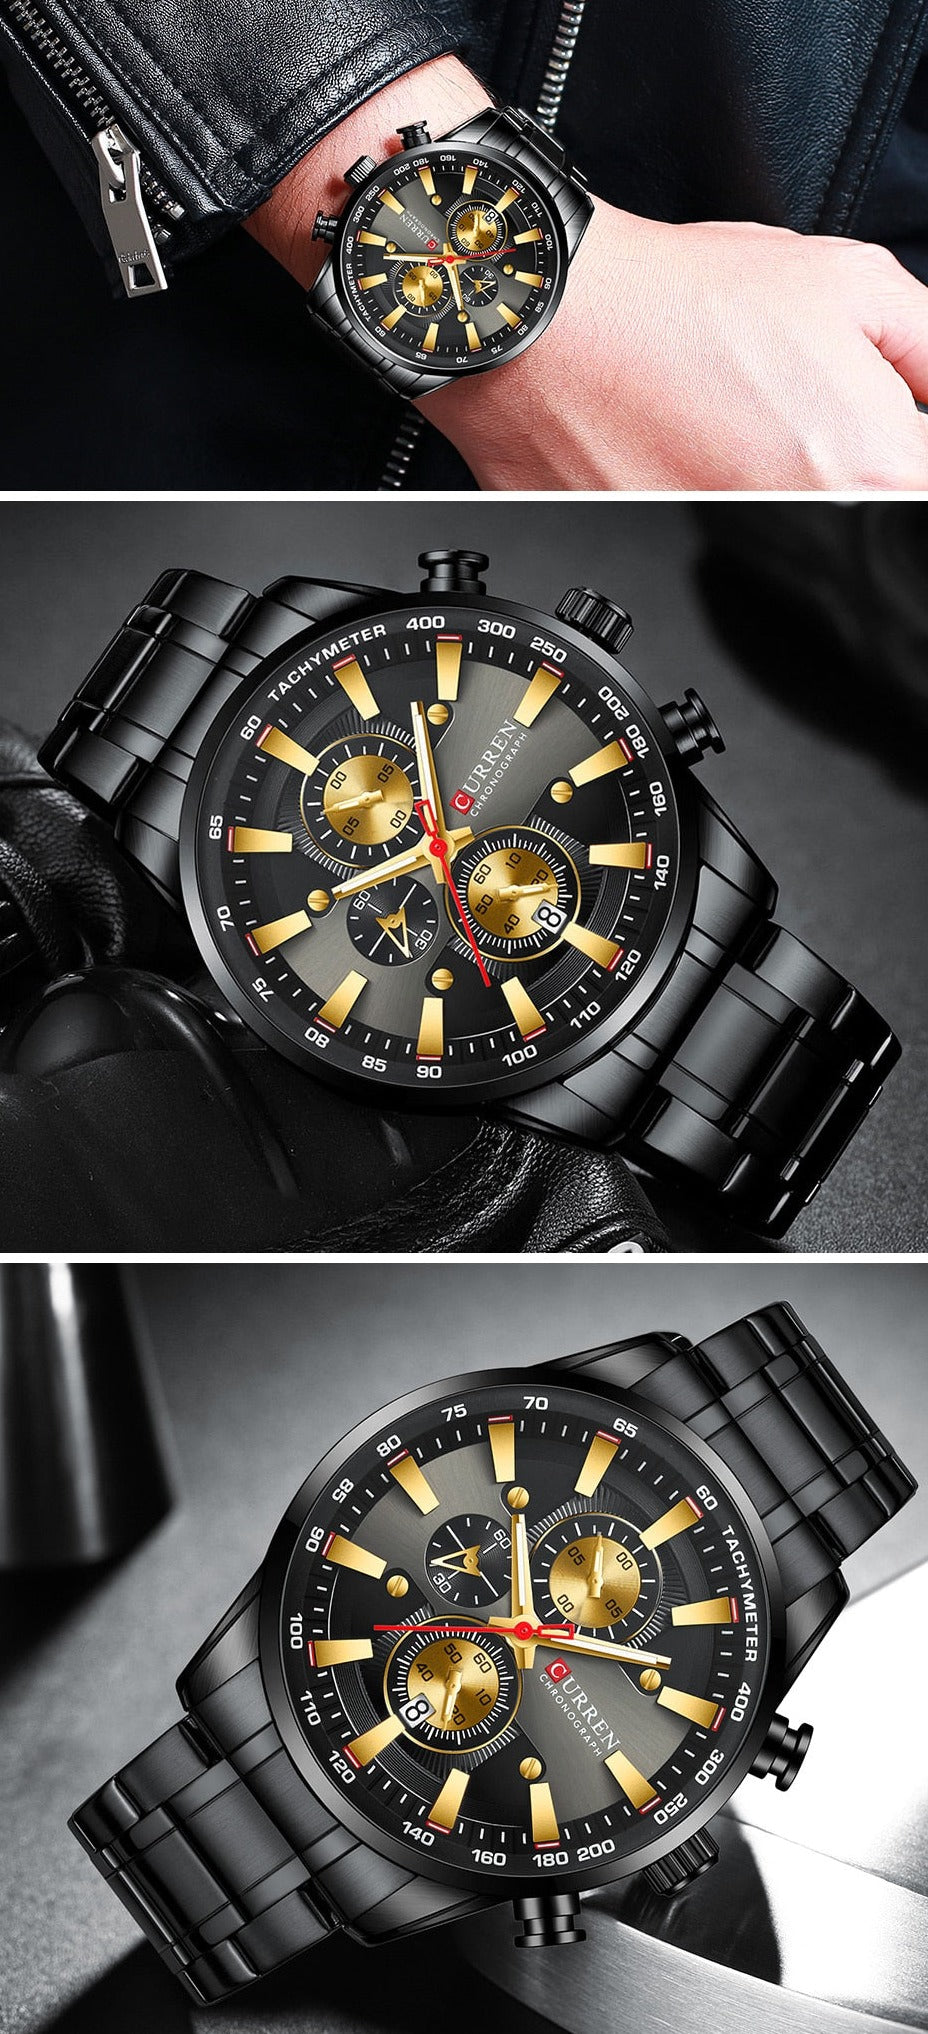 Black/Gold Curren Model 8351 Quartz Sport Chronograph Stainless Steel Watch available from FiveTo.co.uk